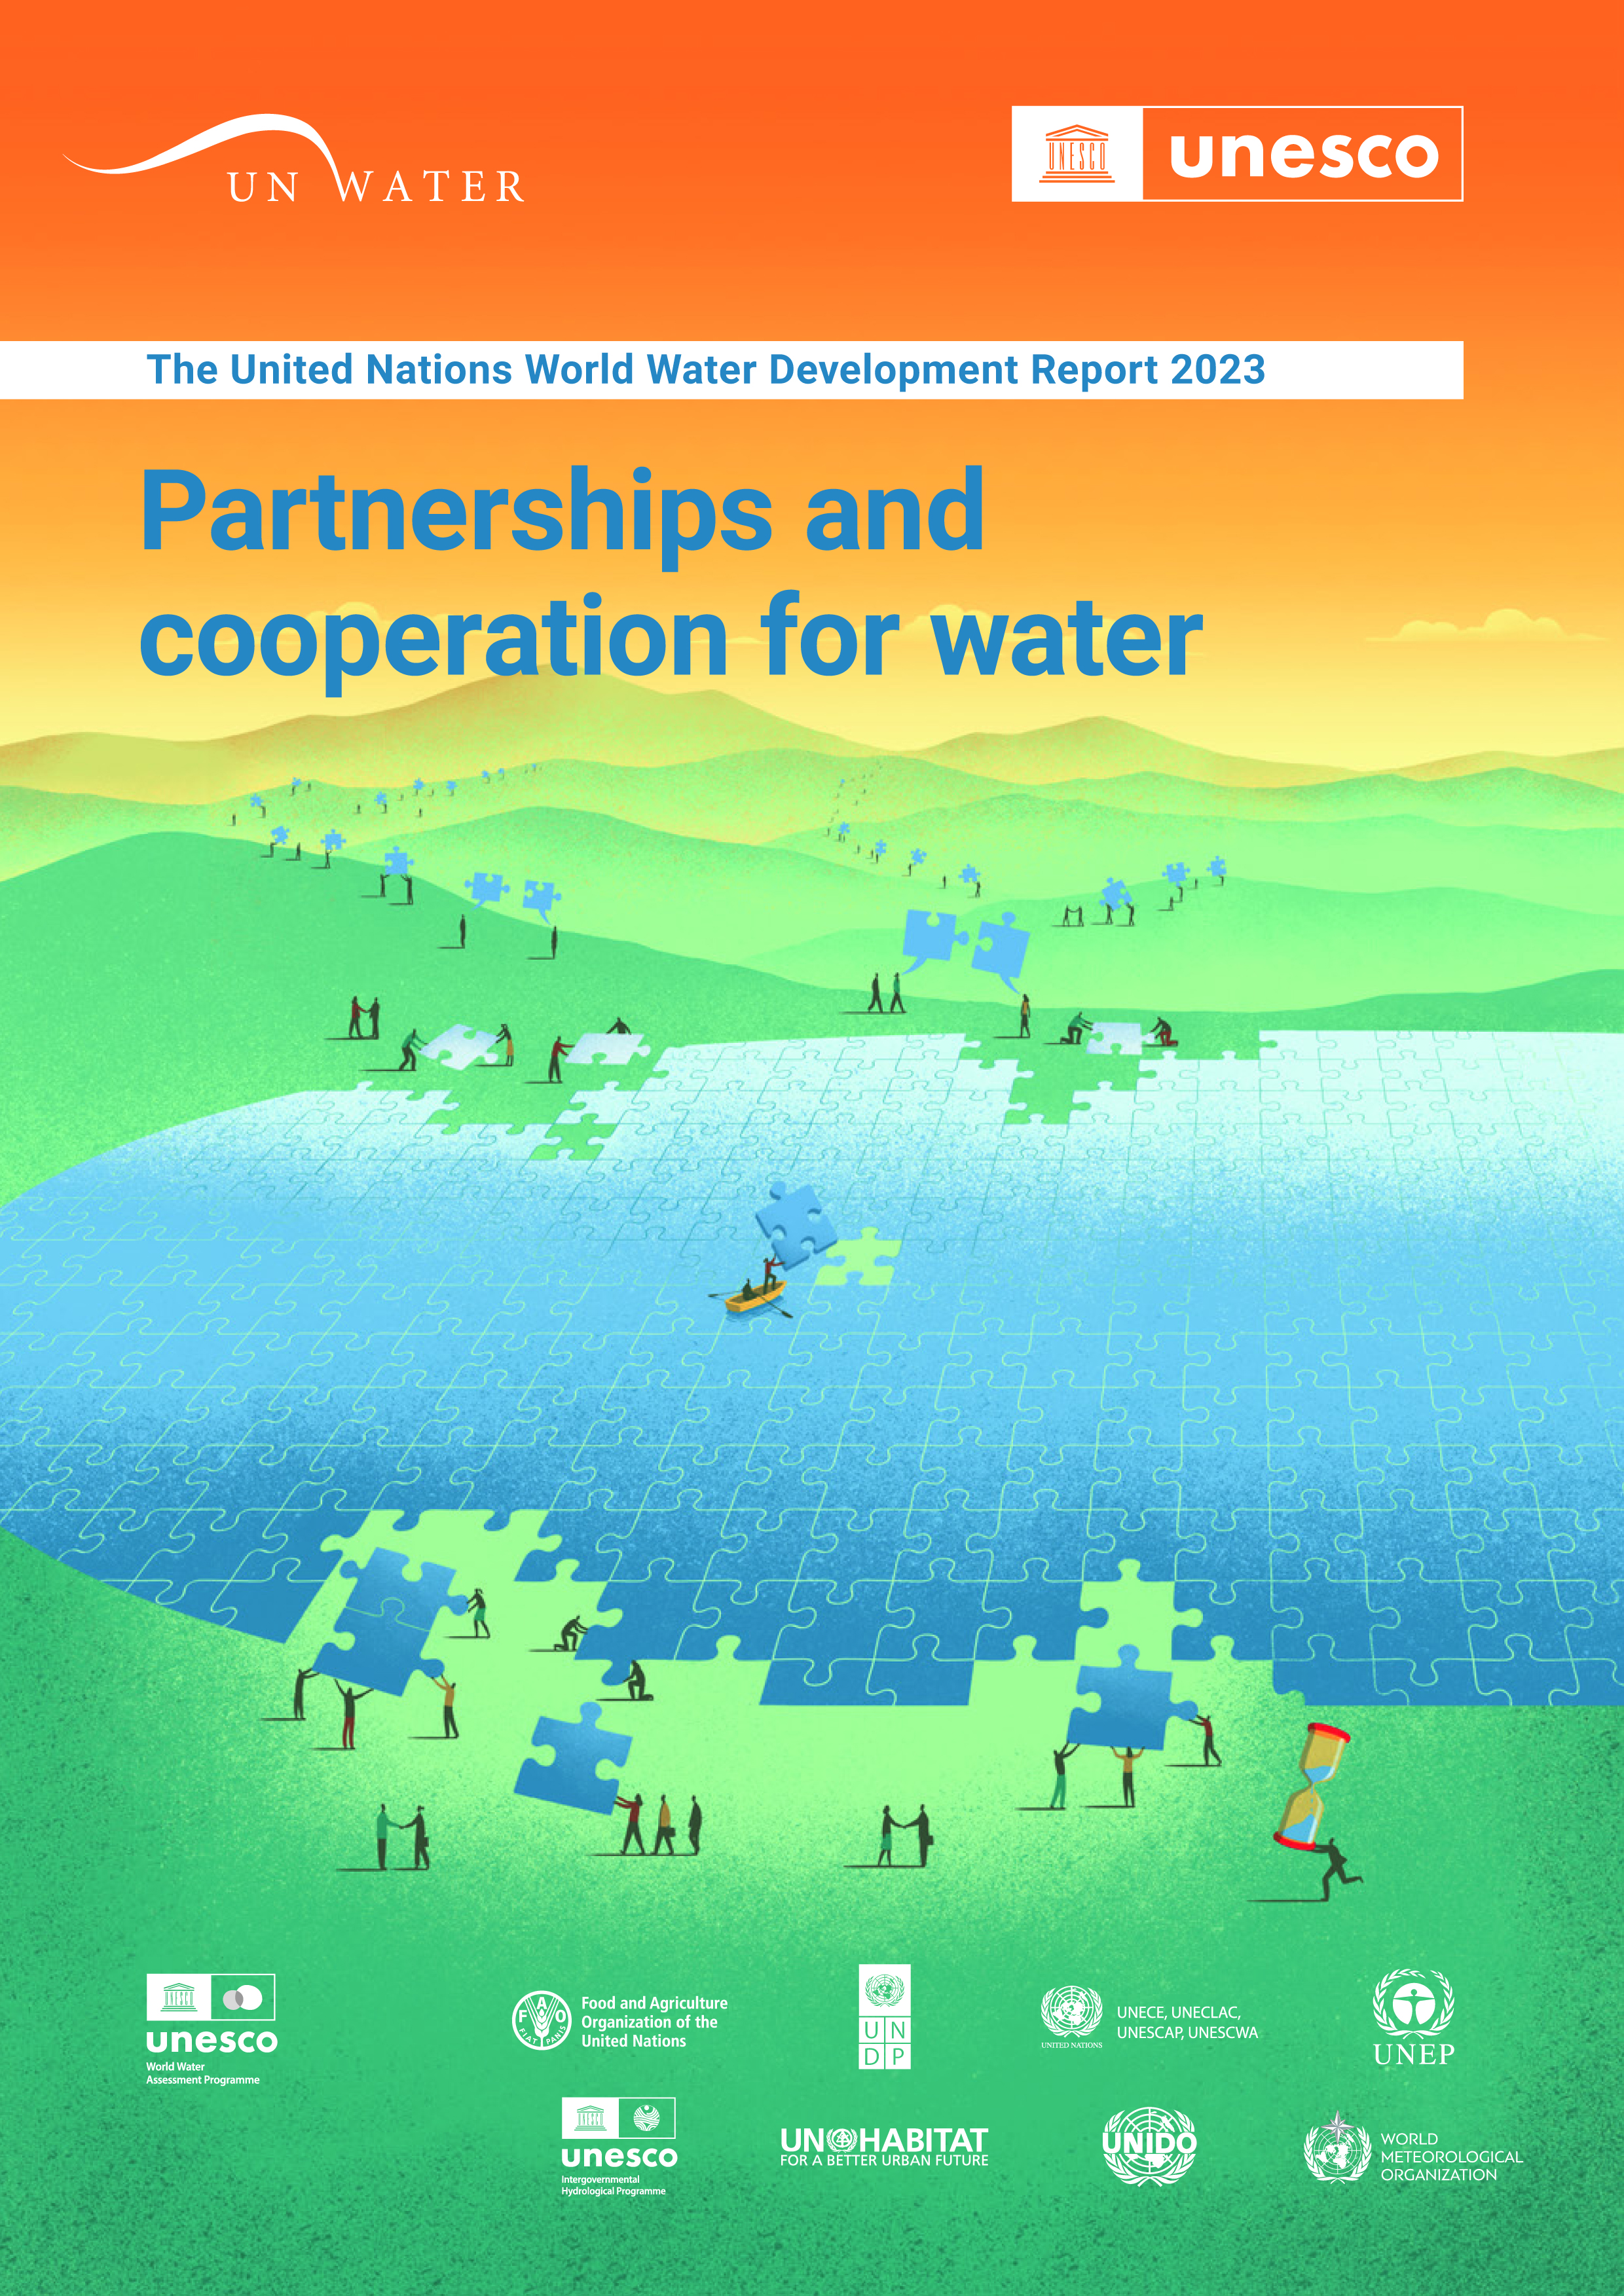 image of The United Nations World Water Development Report 2023